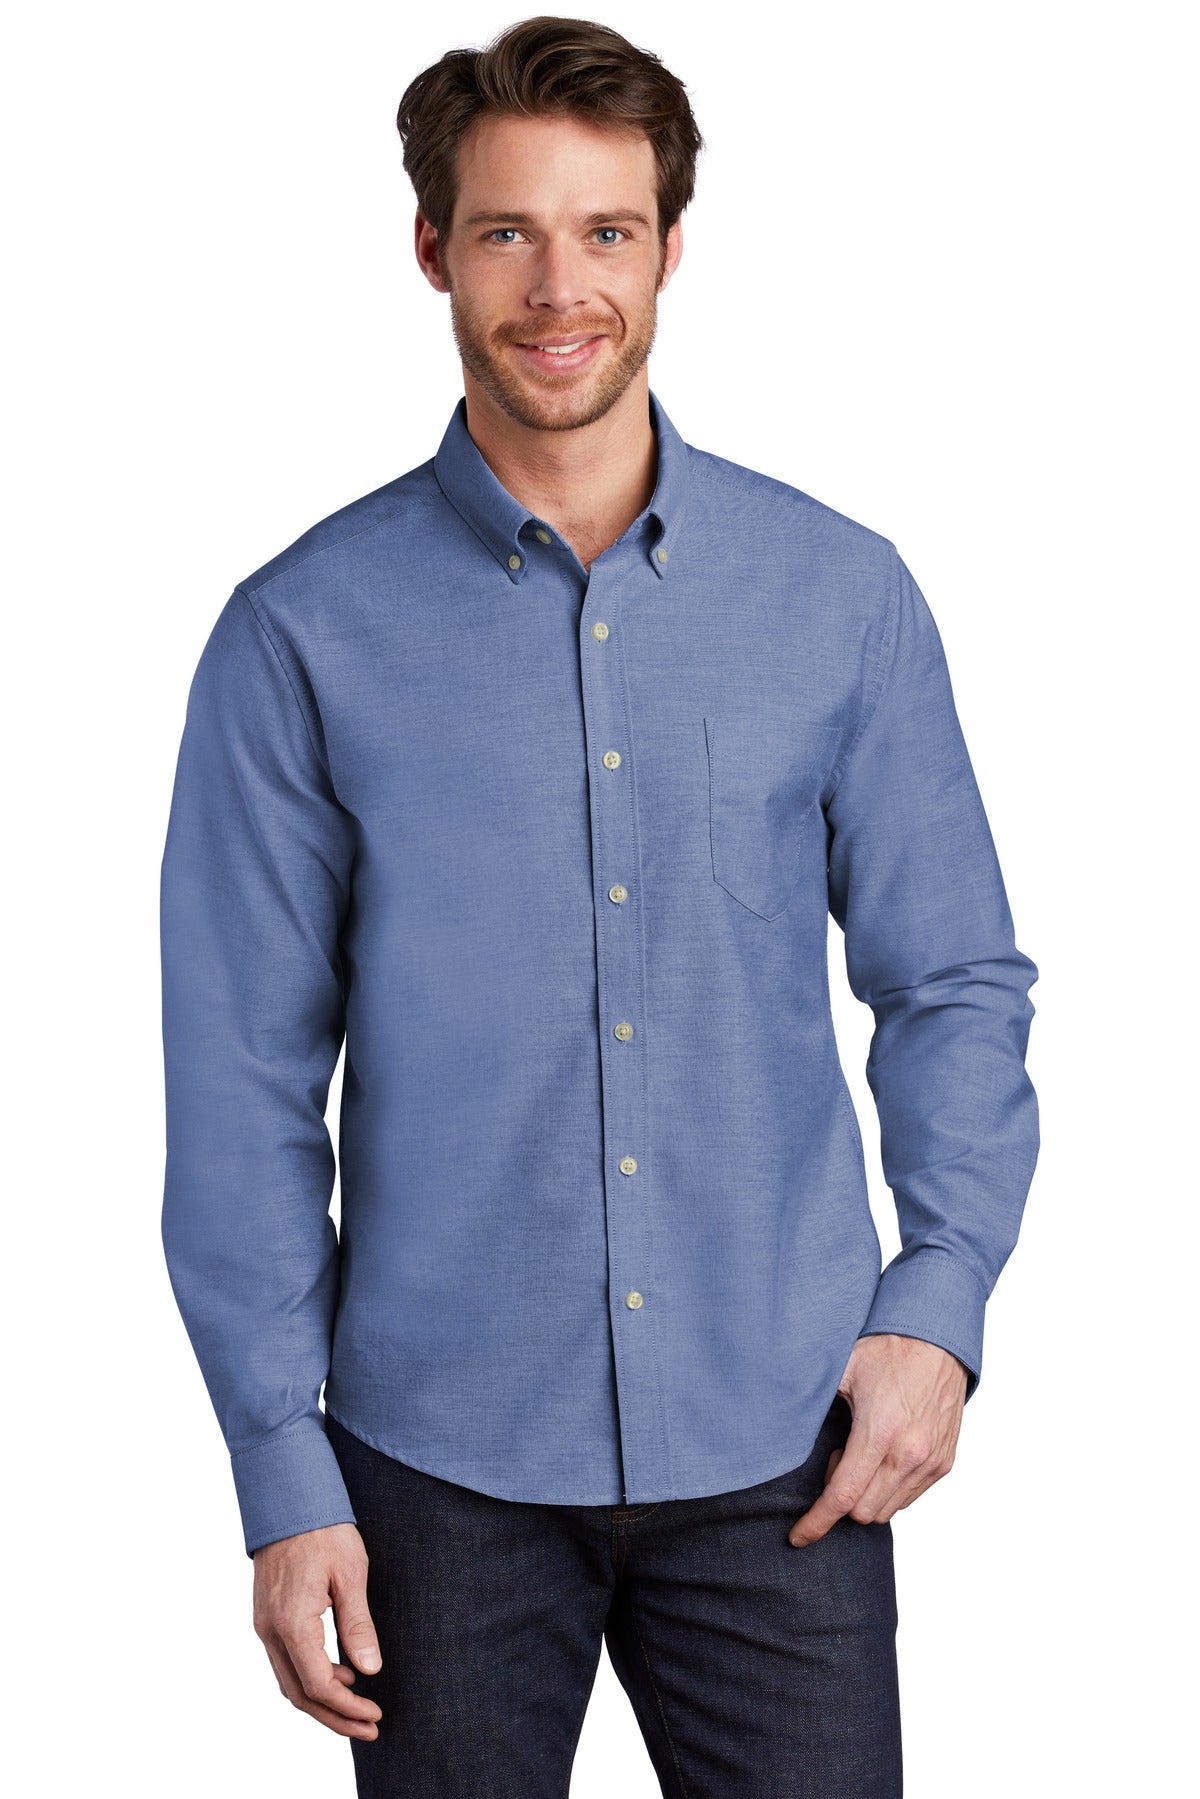 Woven Shirts Navy Port Authority